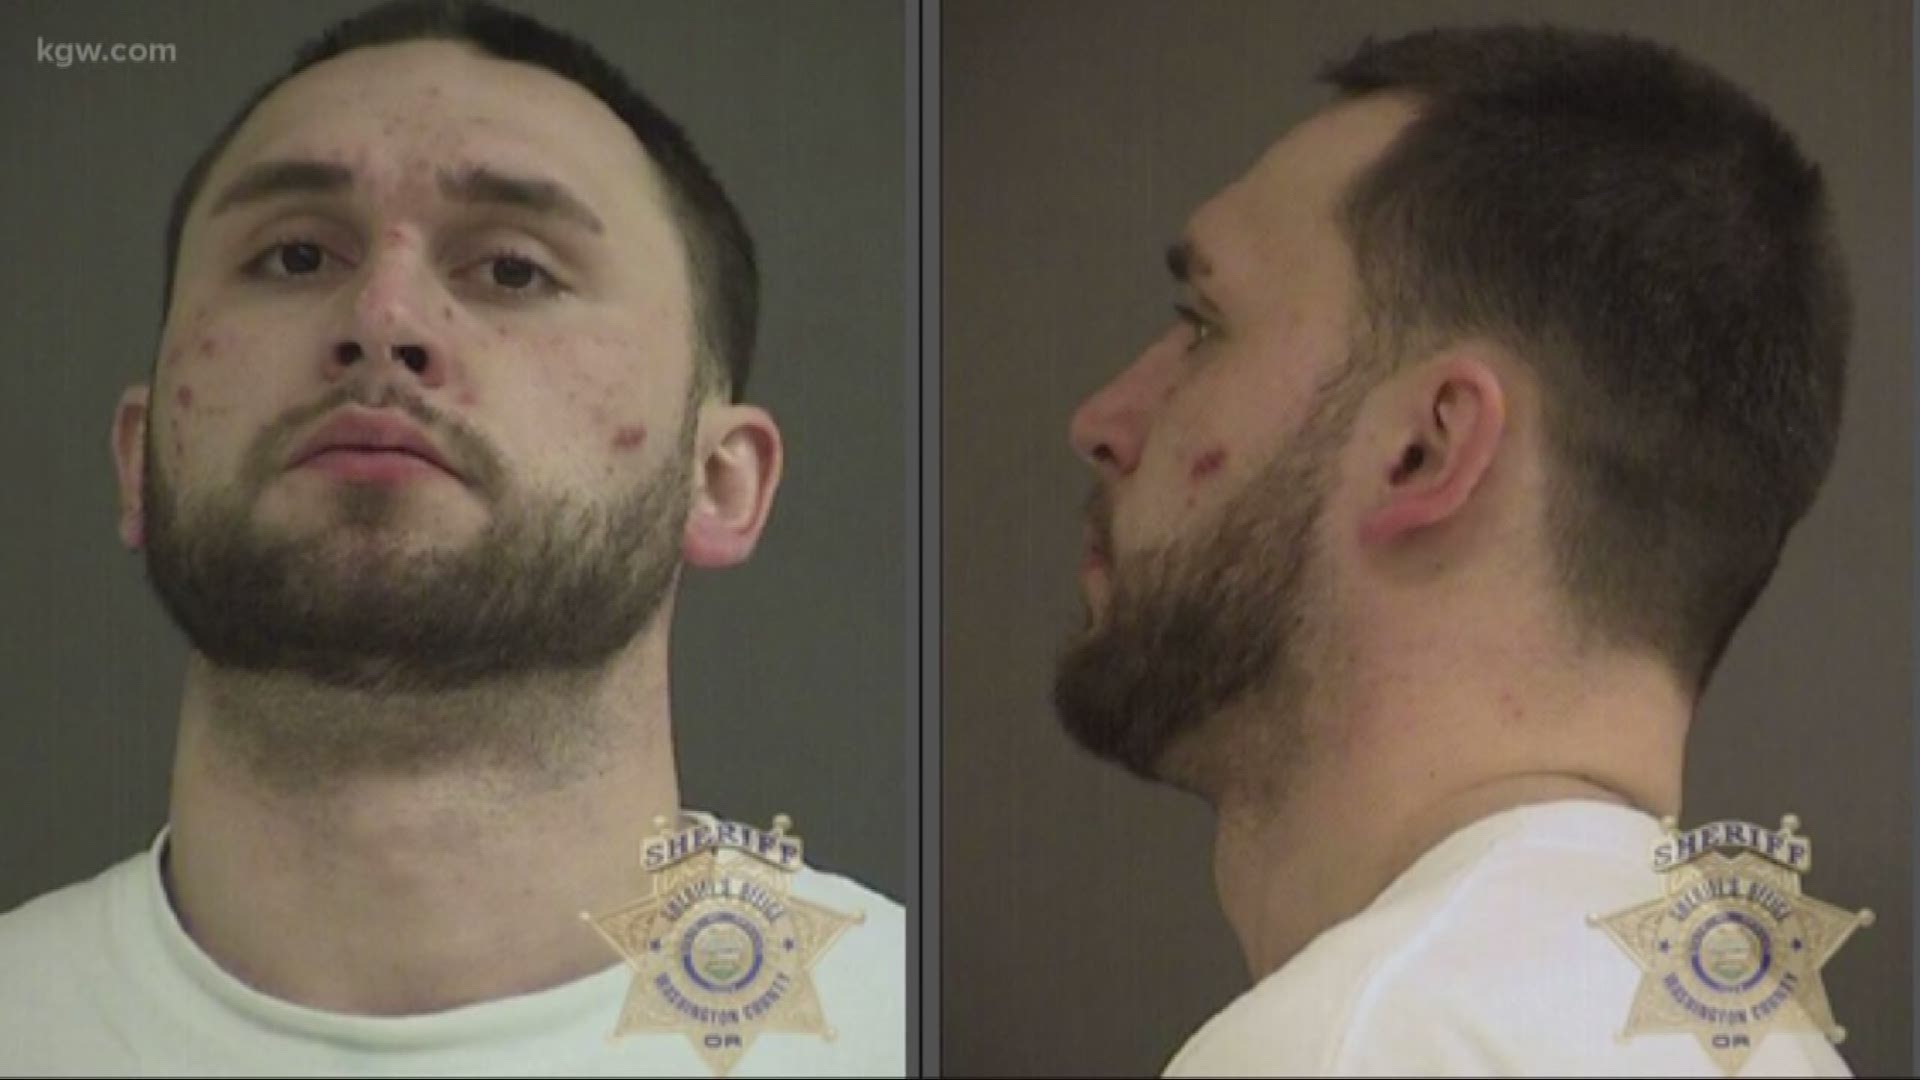 Police arrested former Oregon Ducks star tight end Colt Lyerla last Thursday and booked him into the Washington County Jail. He's facing a charge for heroin possession.